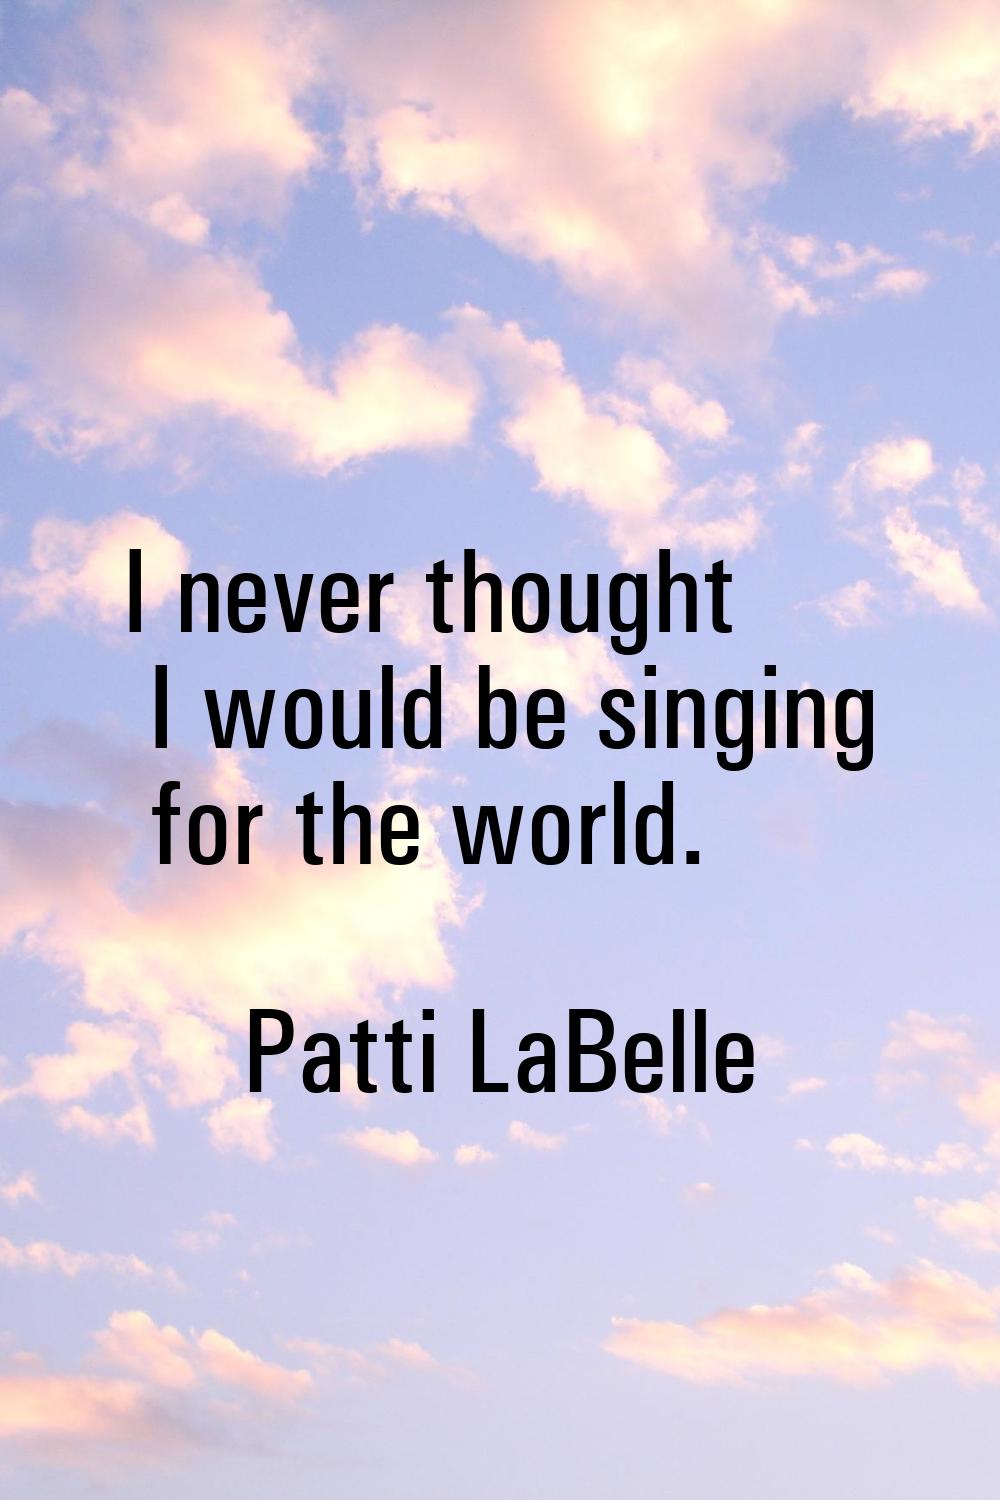 I never thought I would be singing for the world.